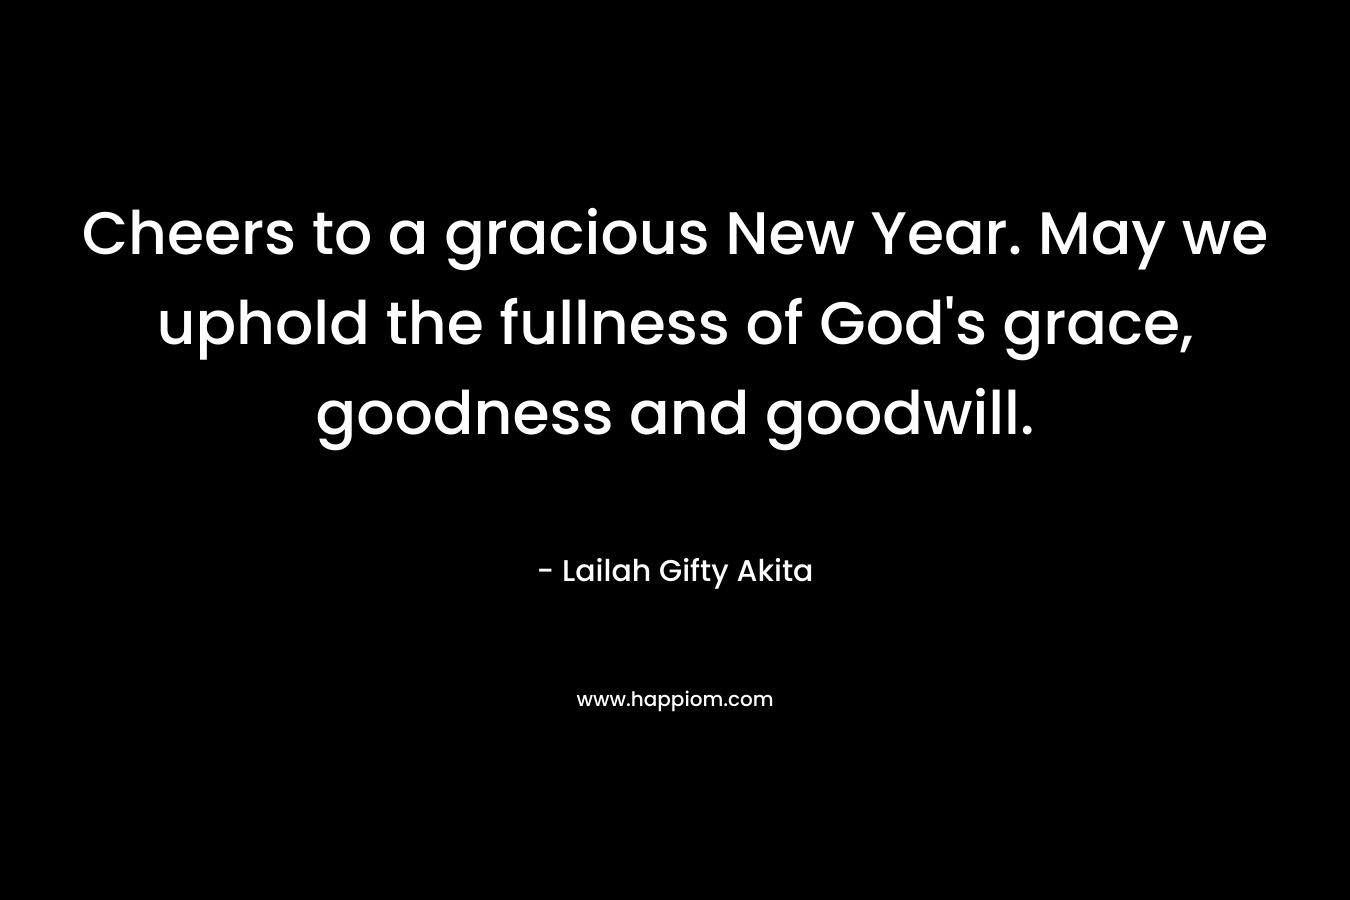 Cheers to a gracious New Year. May we uphold the fullness of God's grace, goodness and goodwill.